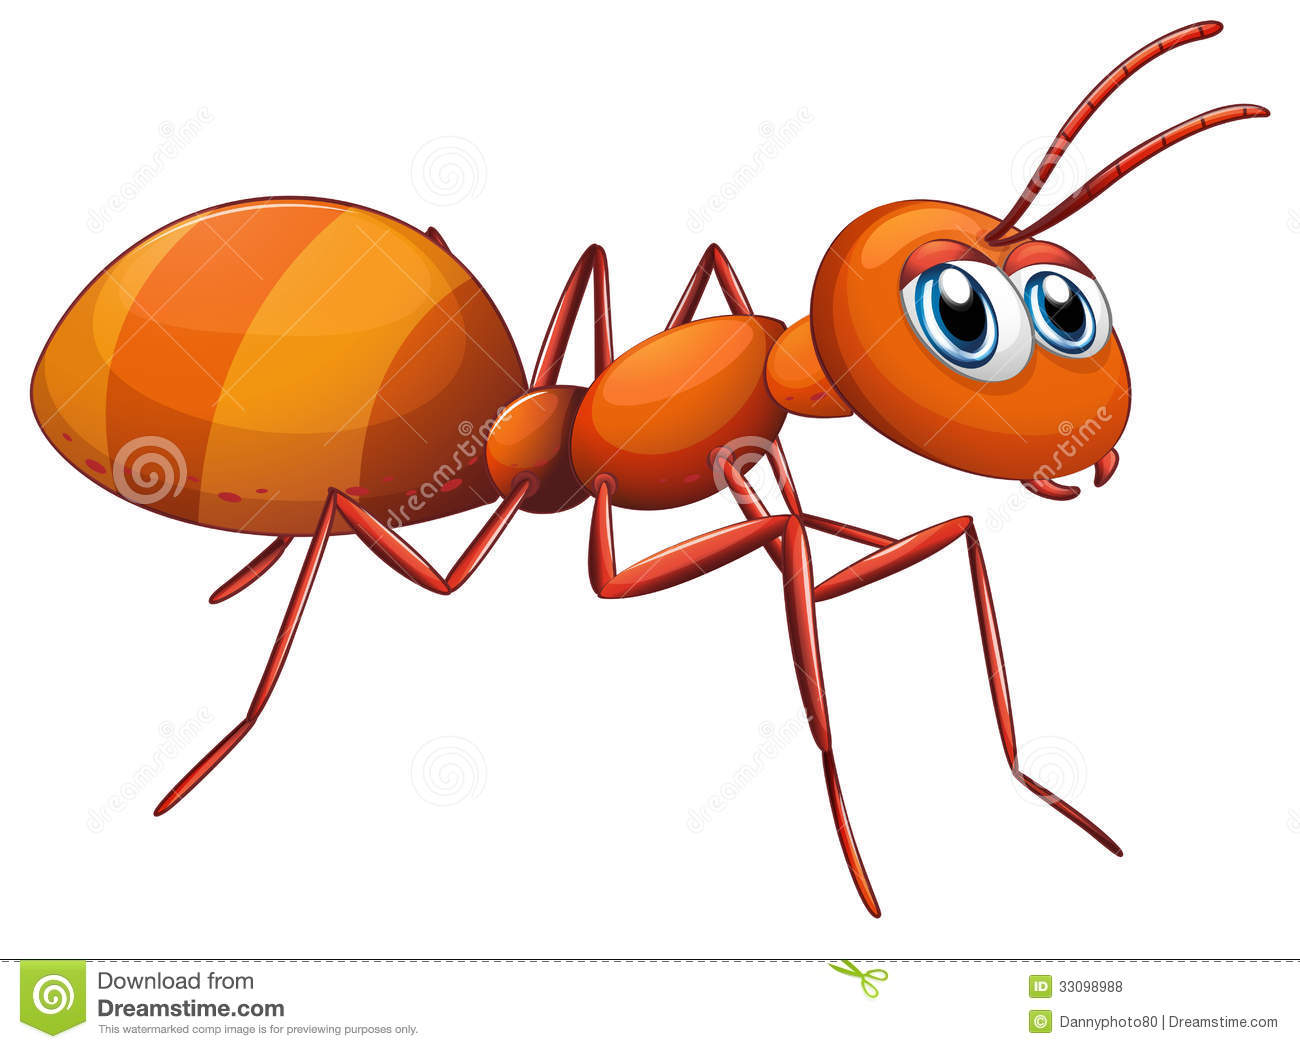 ... An ant - Illustration of 